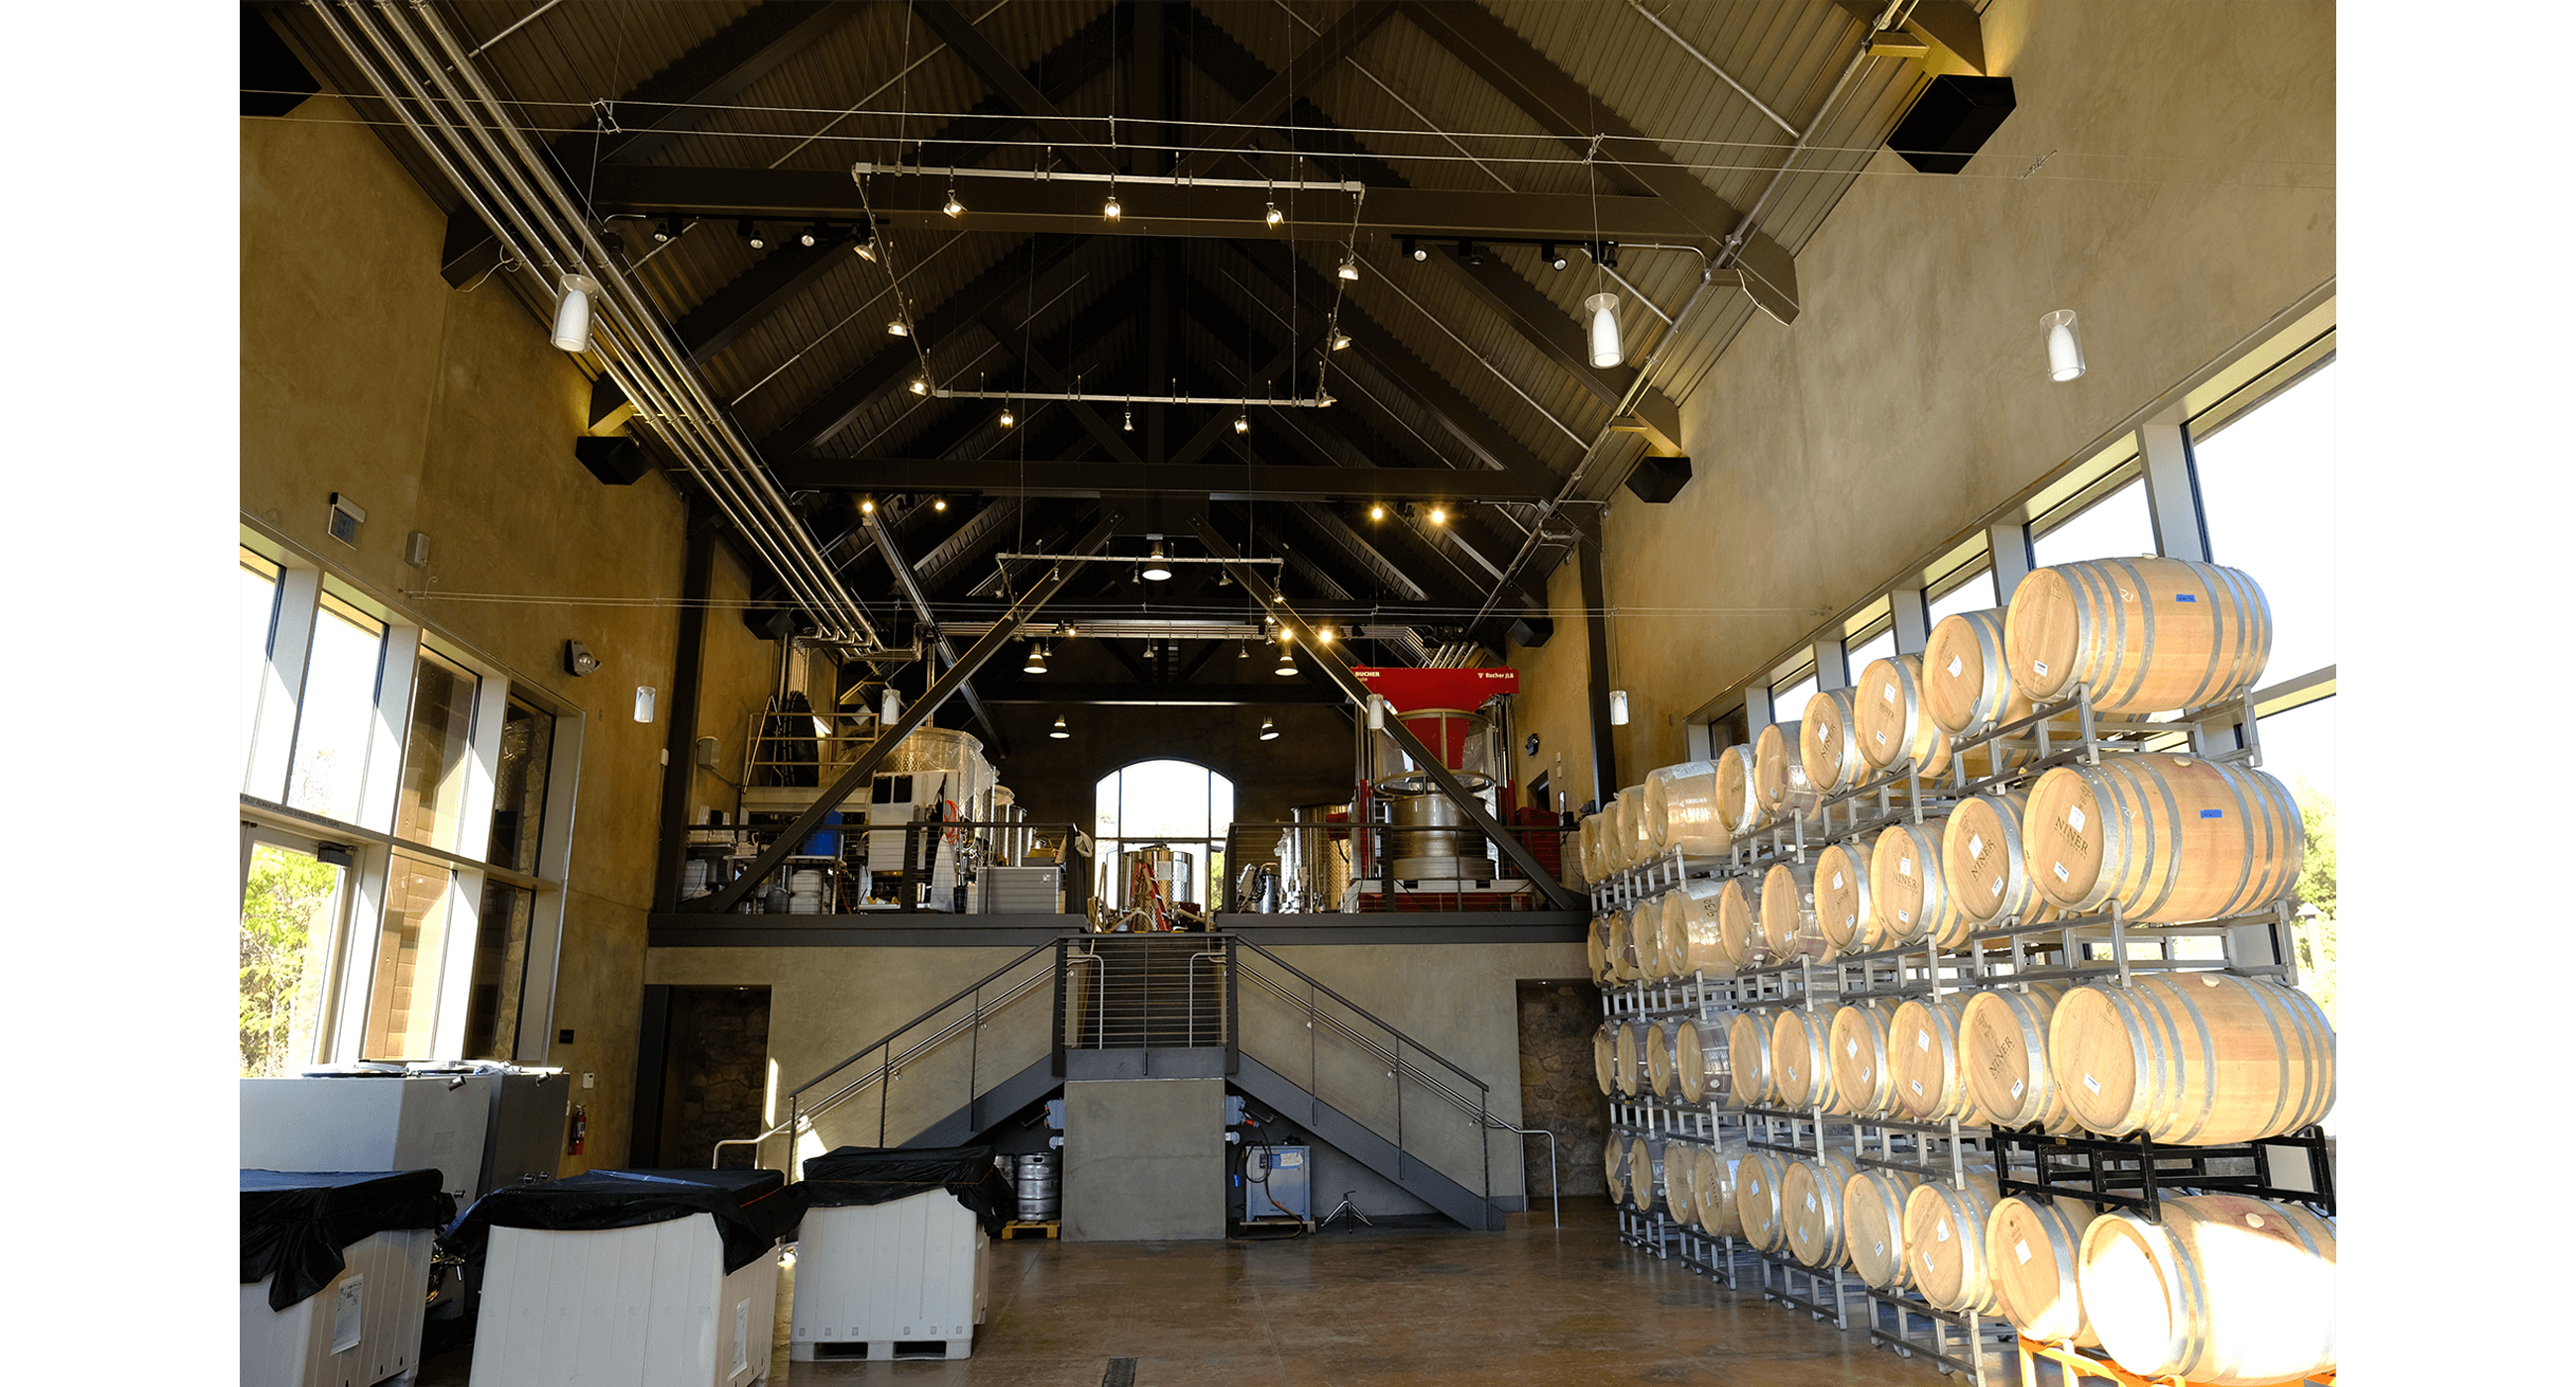 A winery is shown with fermenting tanks on one side and a stack of wine barrels on the other.